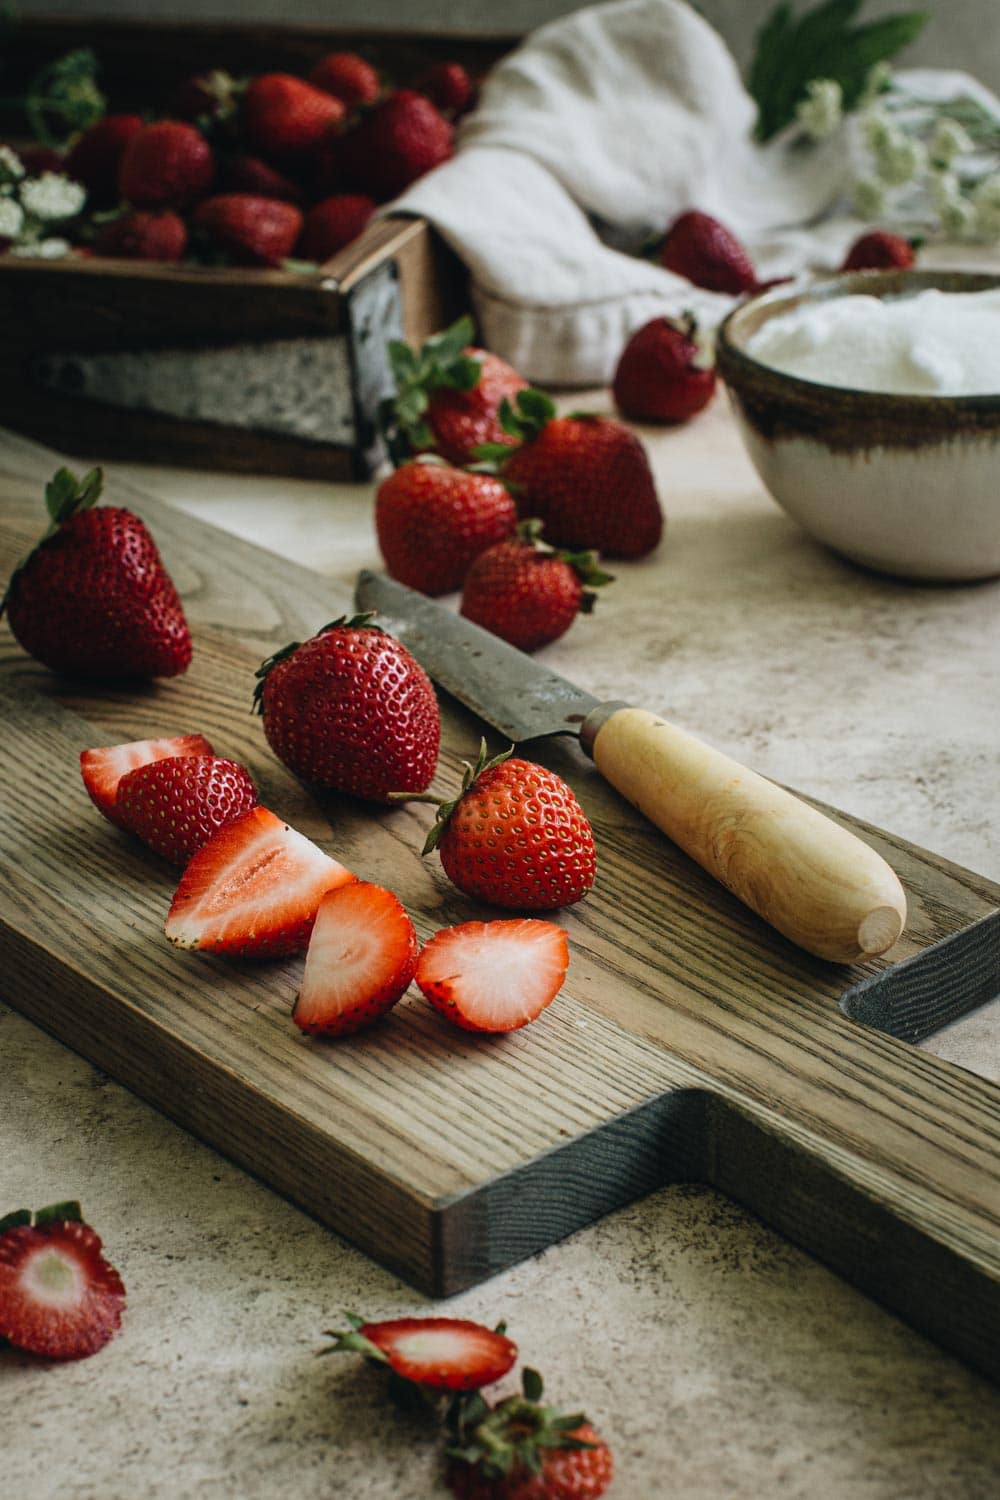 sliced strawberries on wooden cutting board with knife